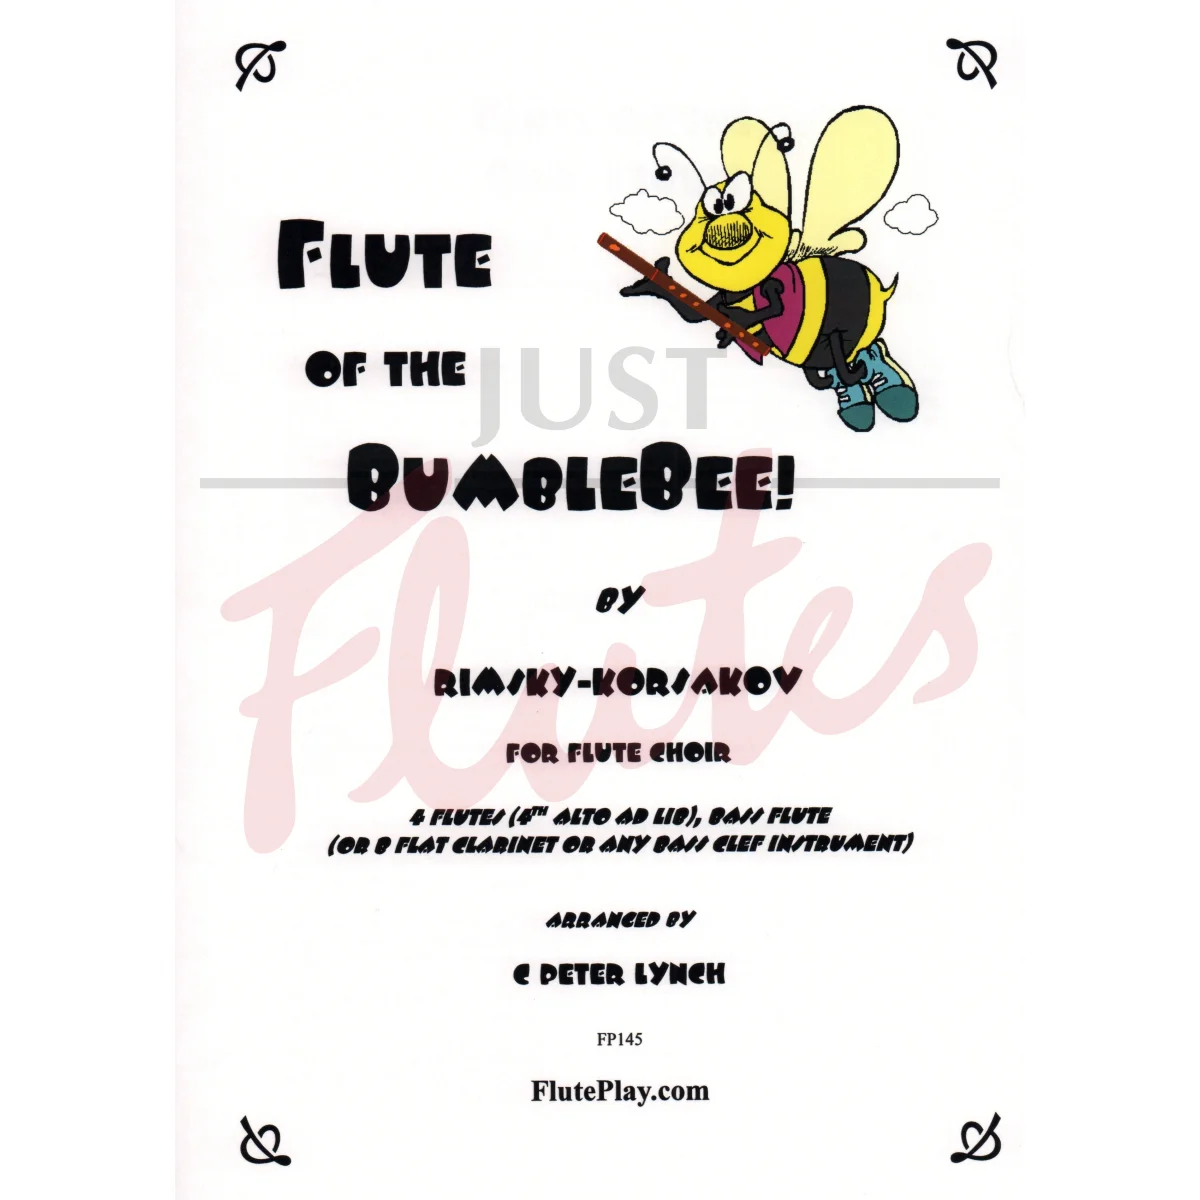 Flute of the Bumble Bee! for Five Flutes